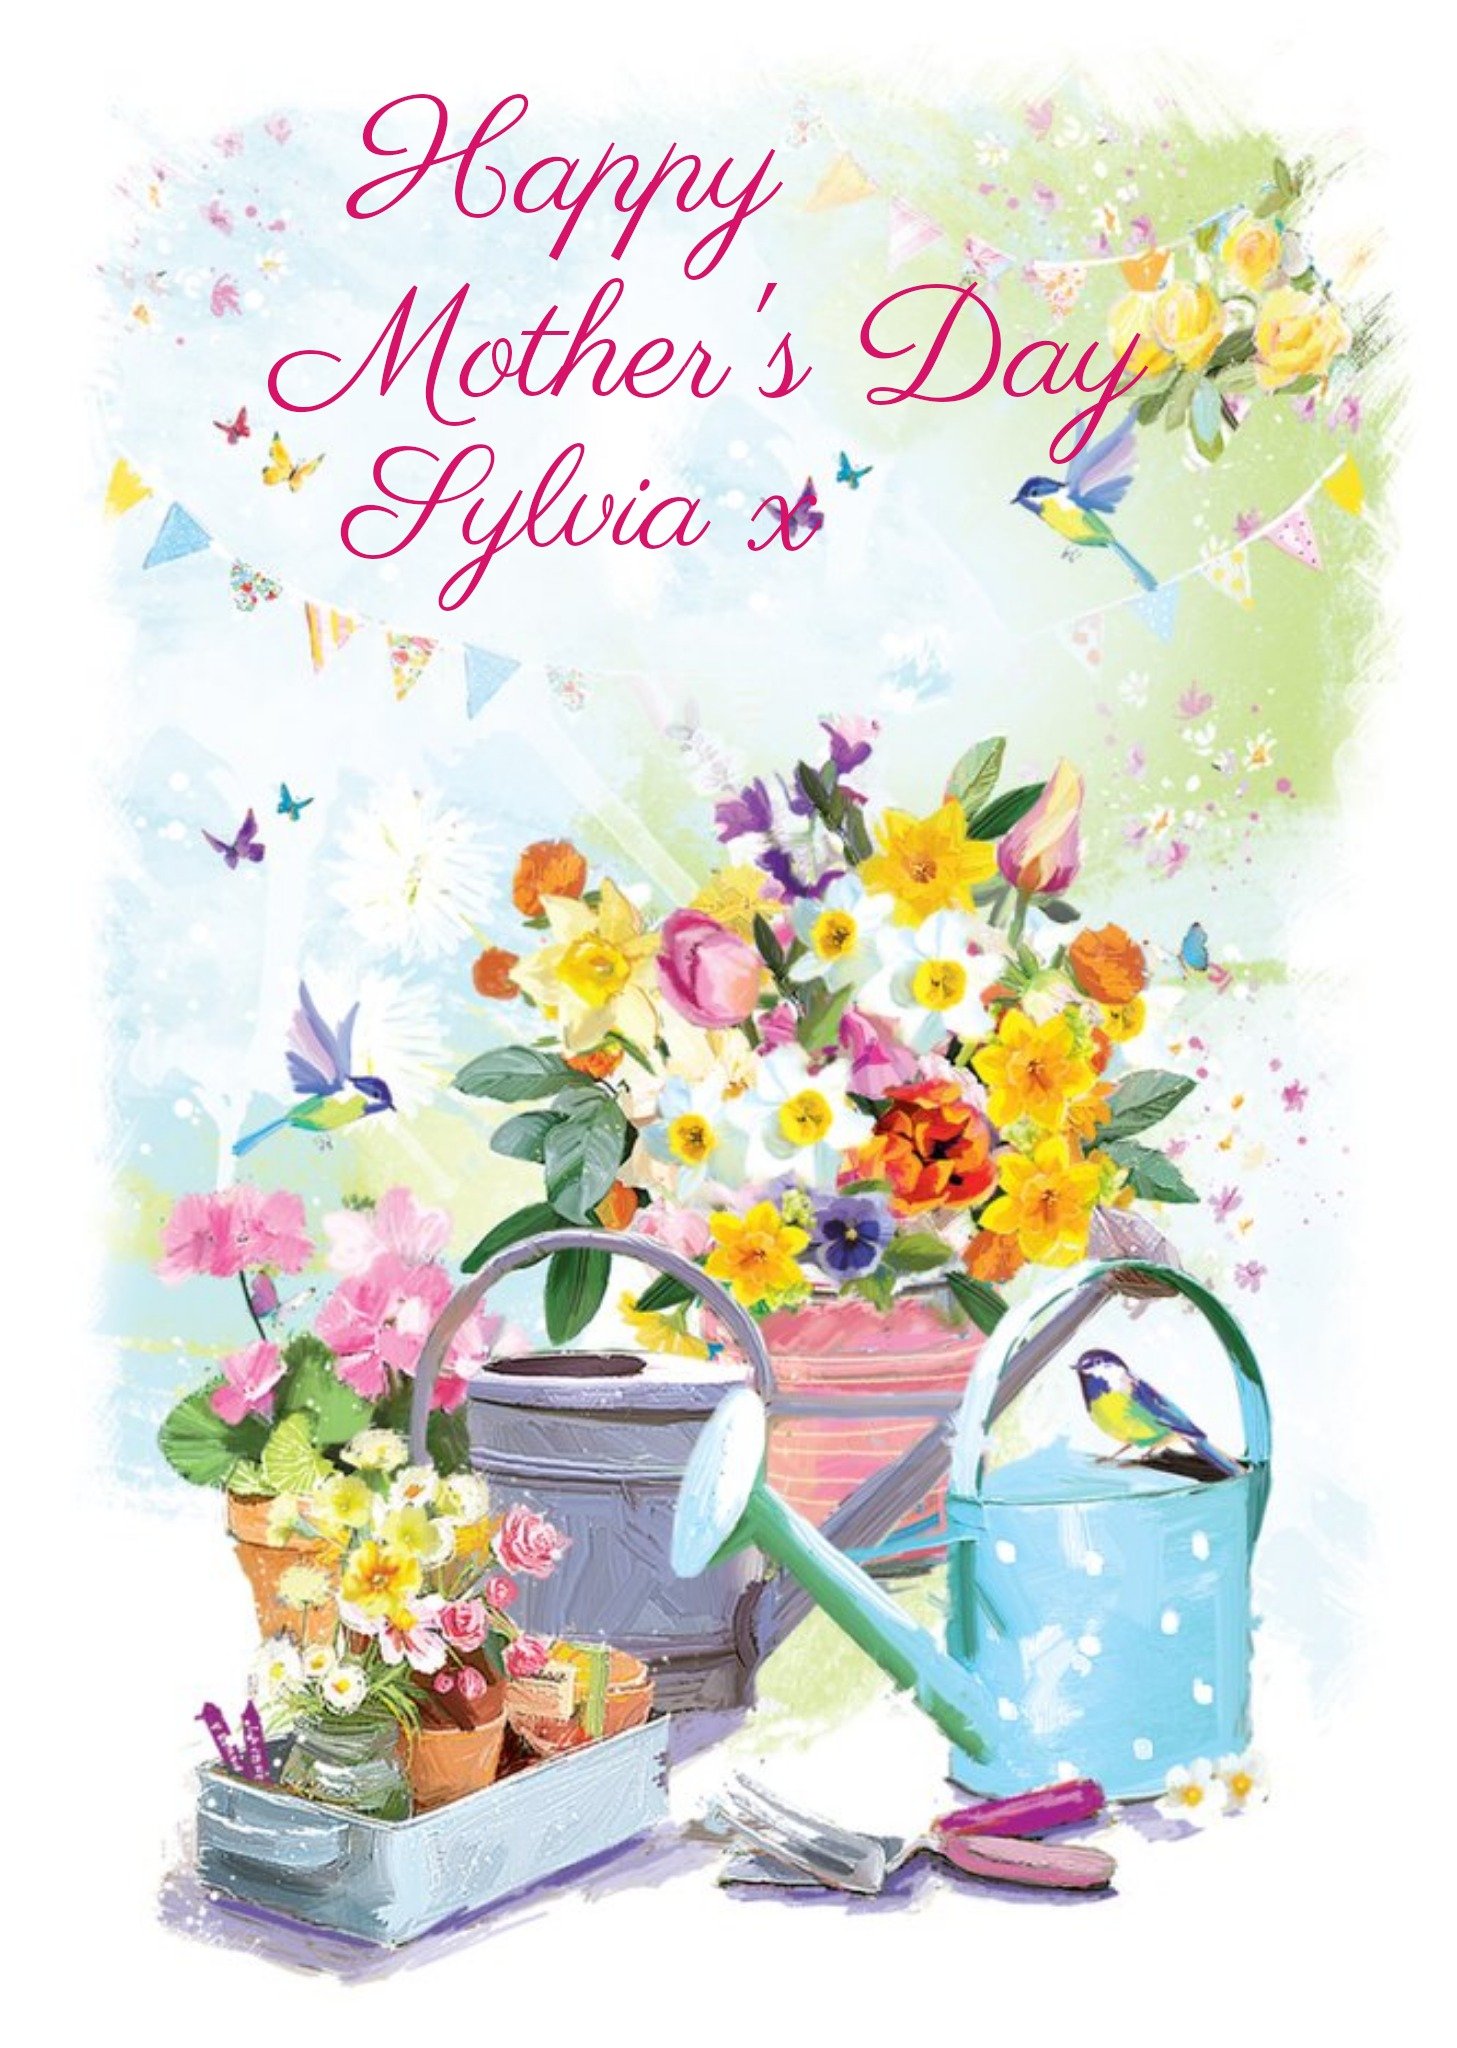 Ling Design Mother's Day Card - Gardening - Floral Ecard